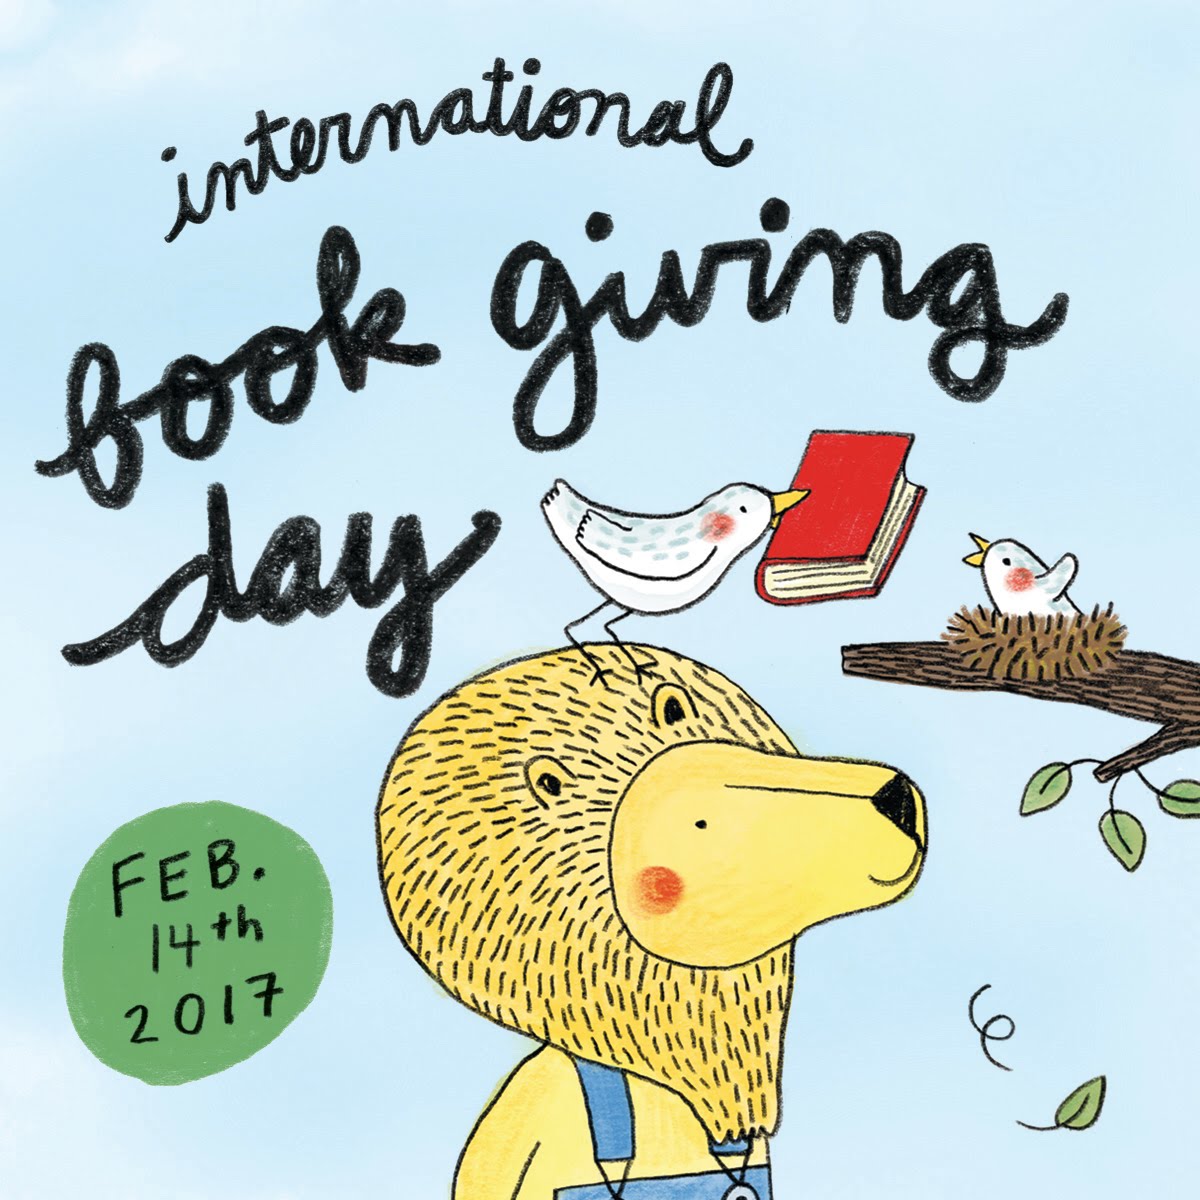 International Book Giving Day February 14, 2017